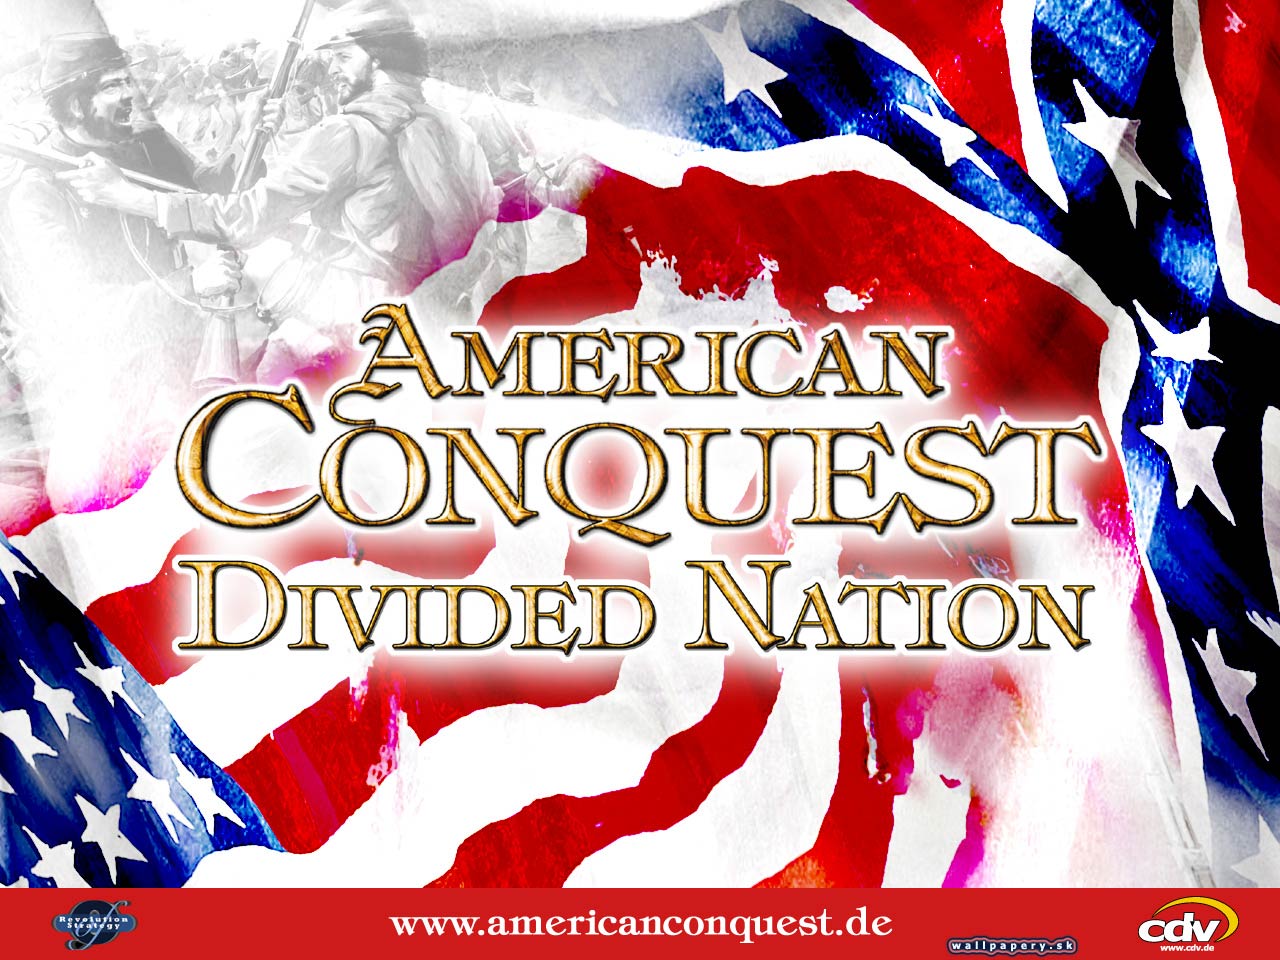 American Conquest: Divided Nation - wallpaper 2